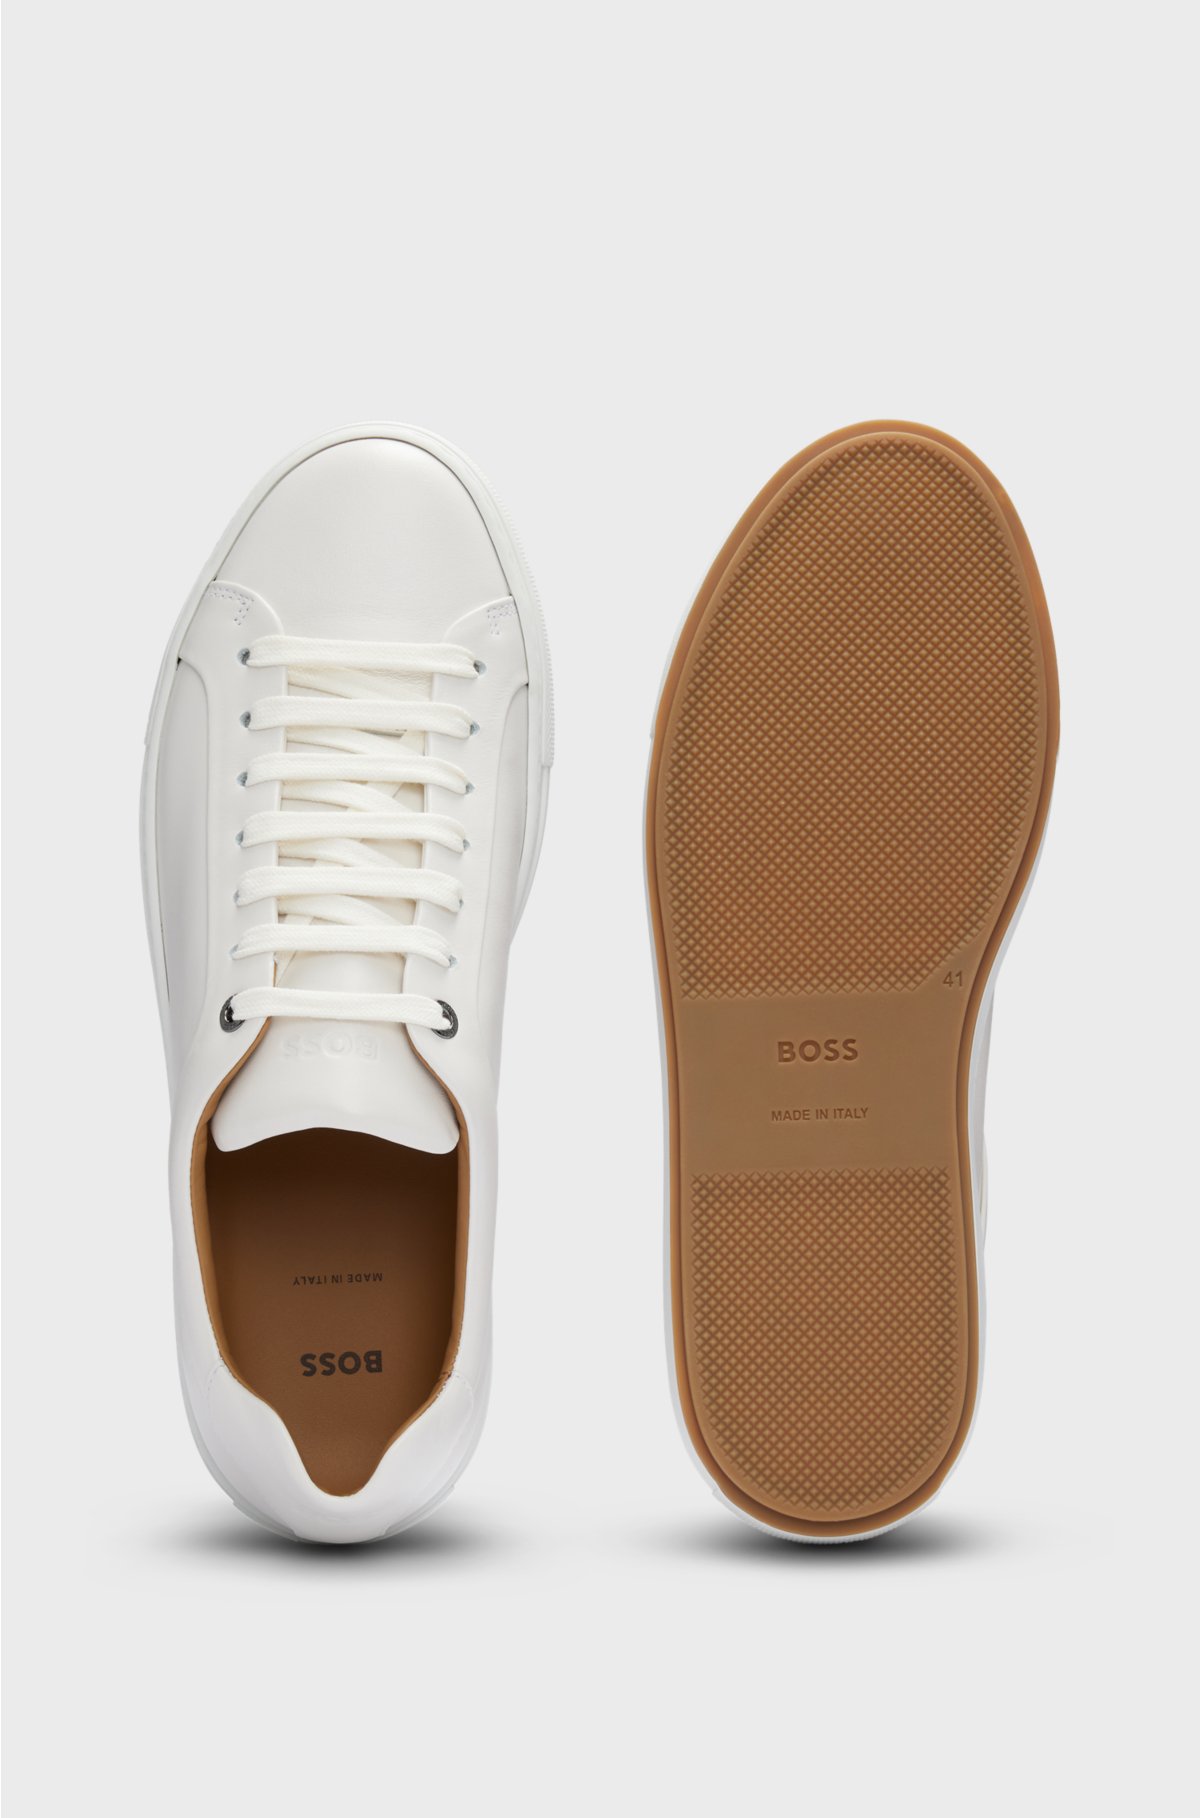 Leather cupsole trainers with logo details crafted in Italy, White